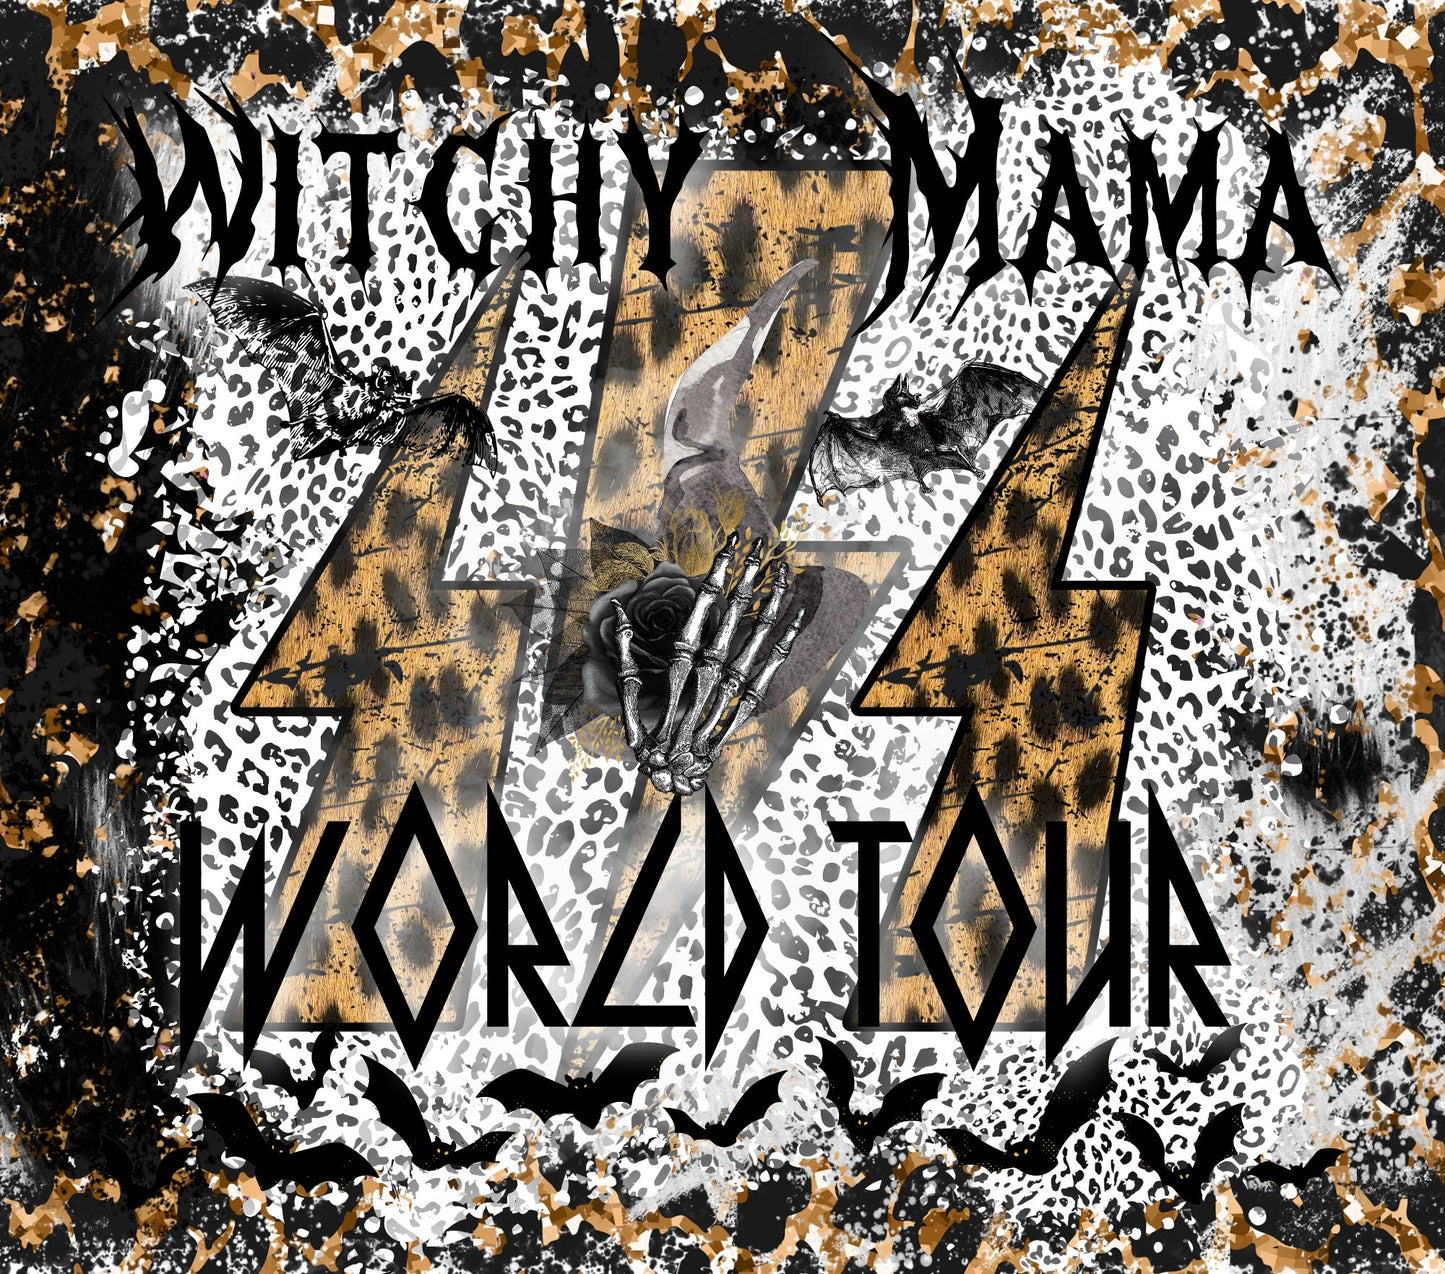 Witchy Mama World Tour - CW0090